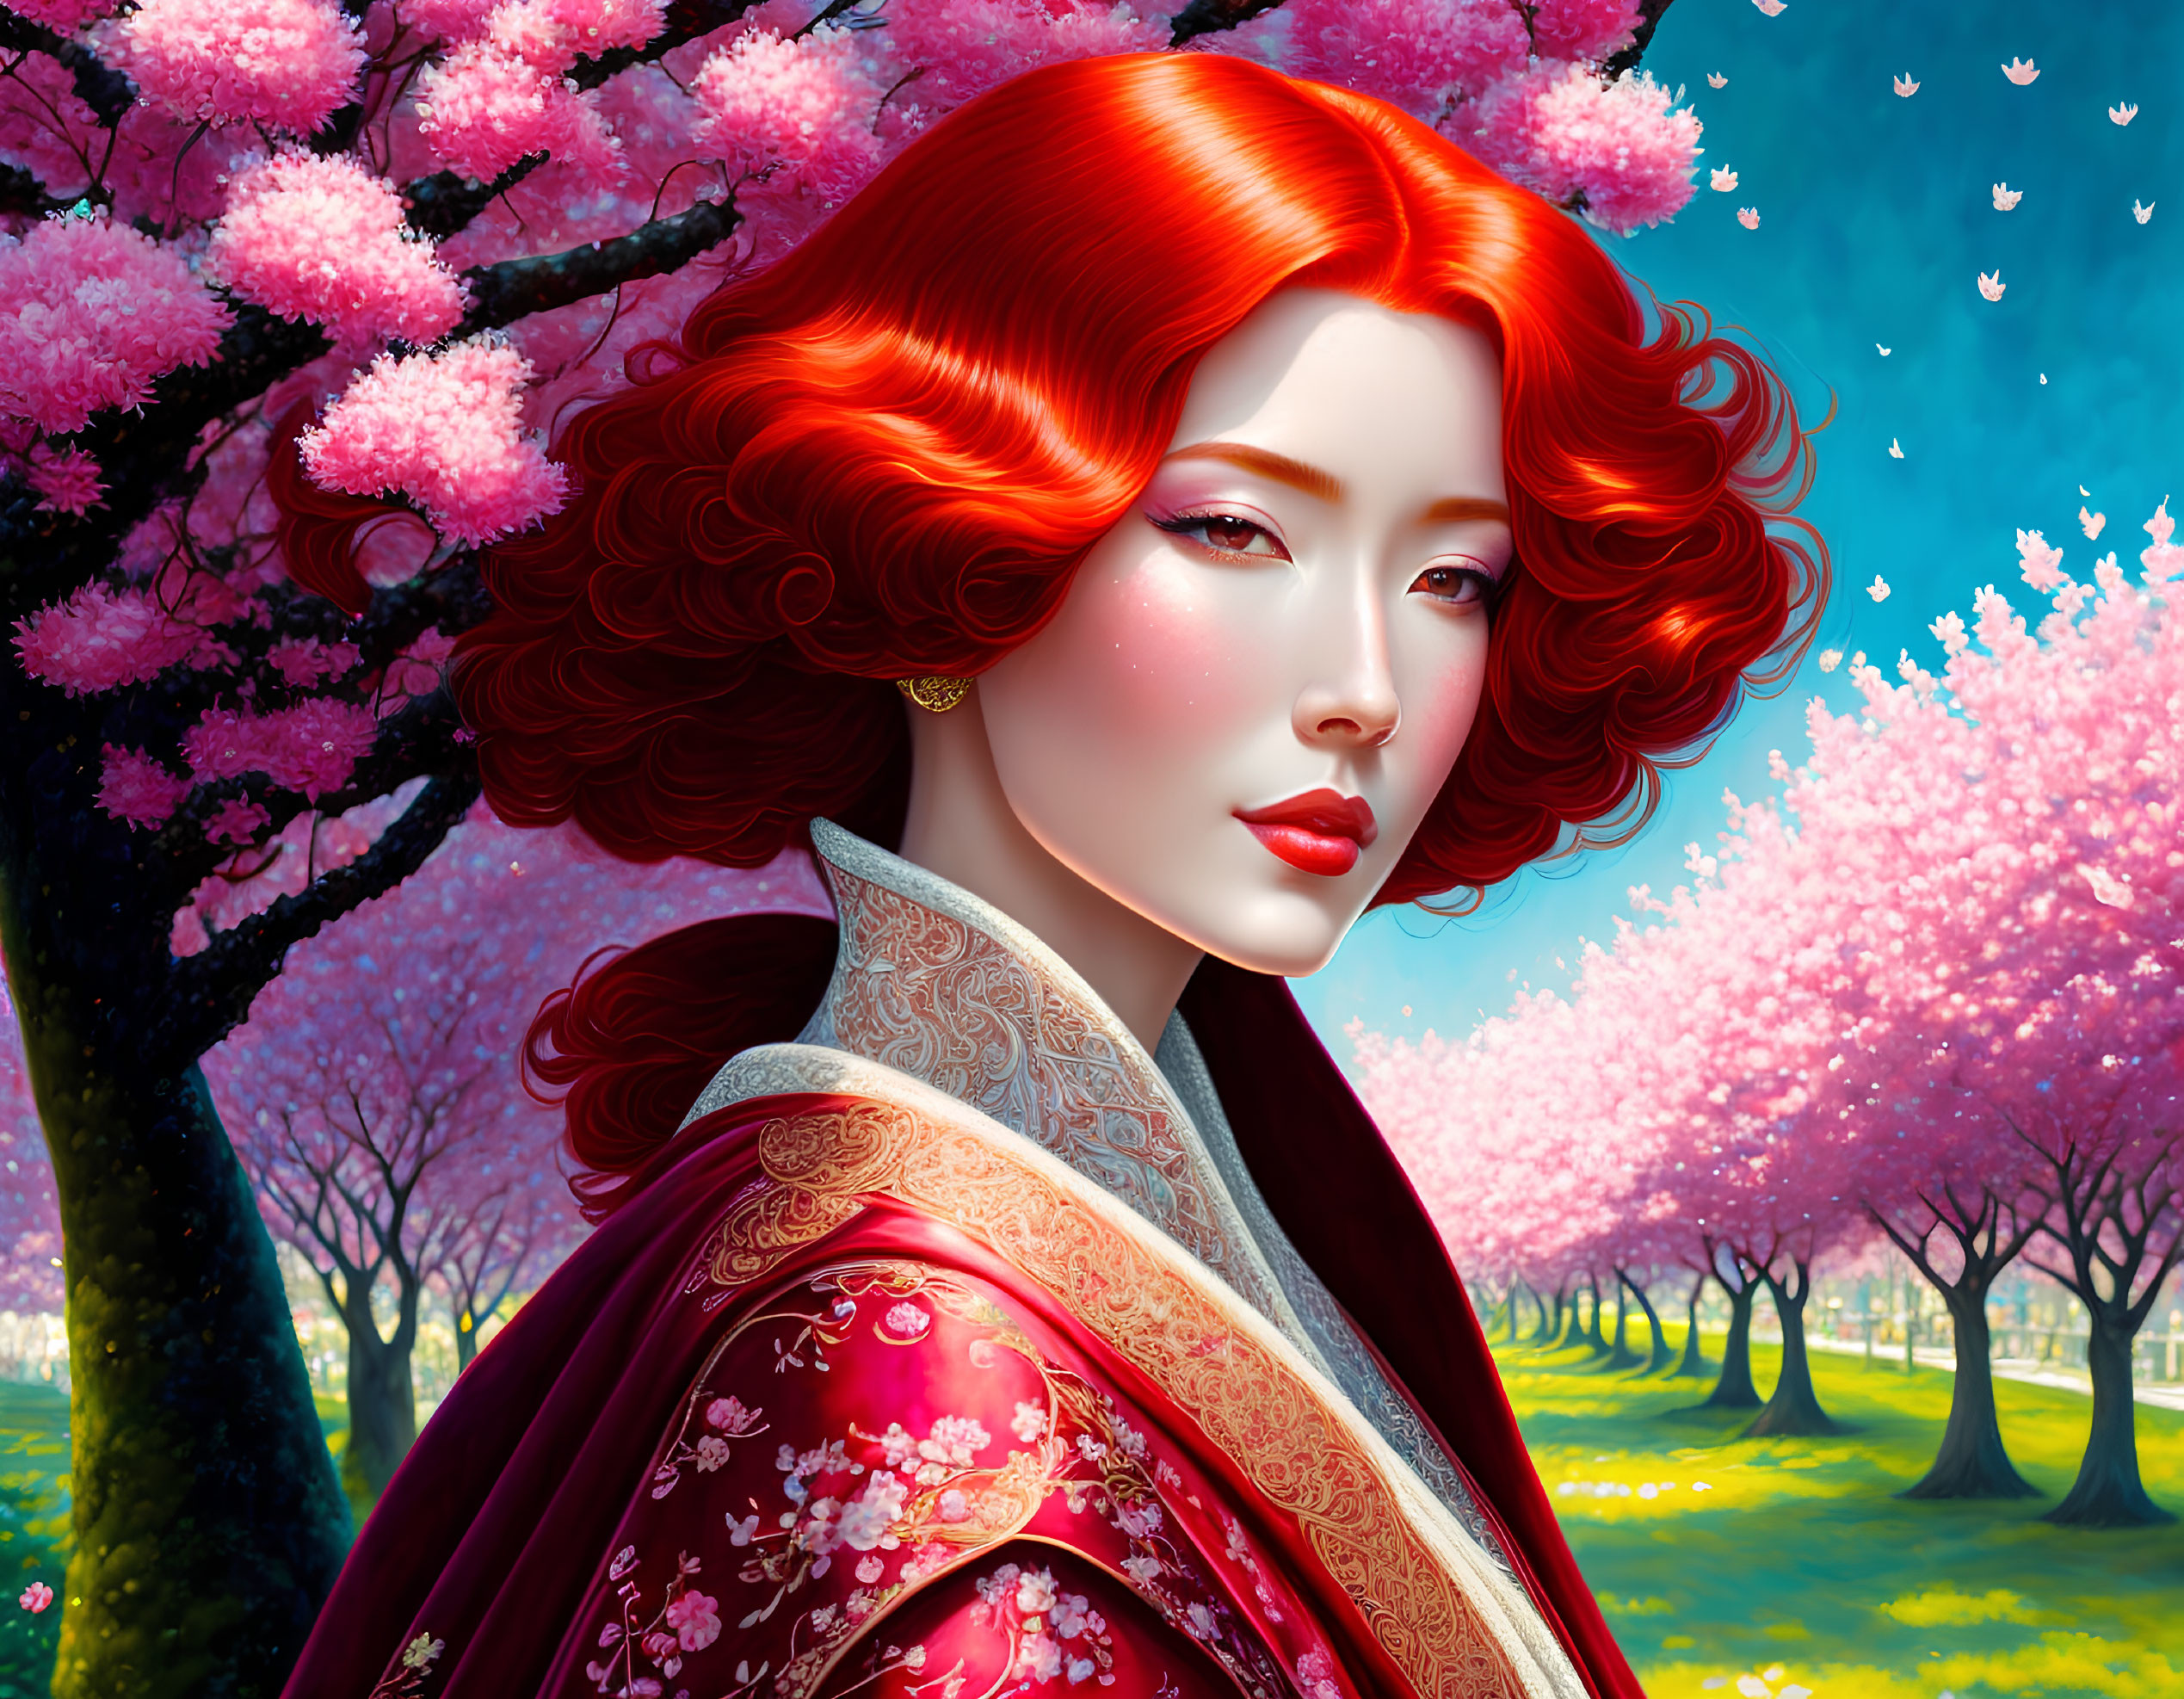 Digital artwork: Woman with red hair in Asian attire among cherry blossoms